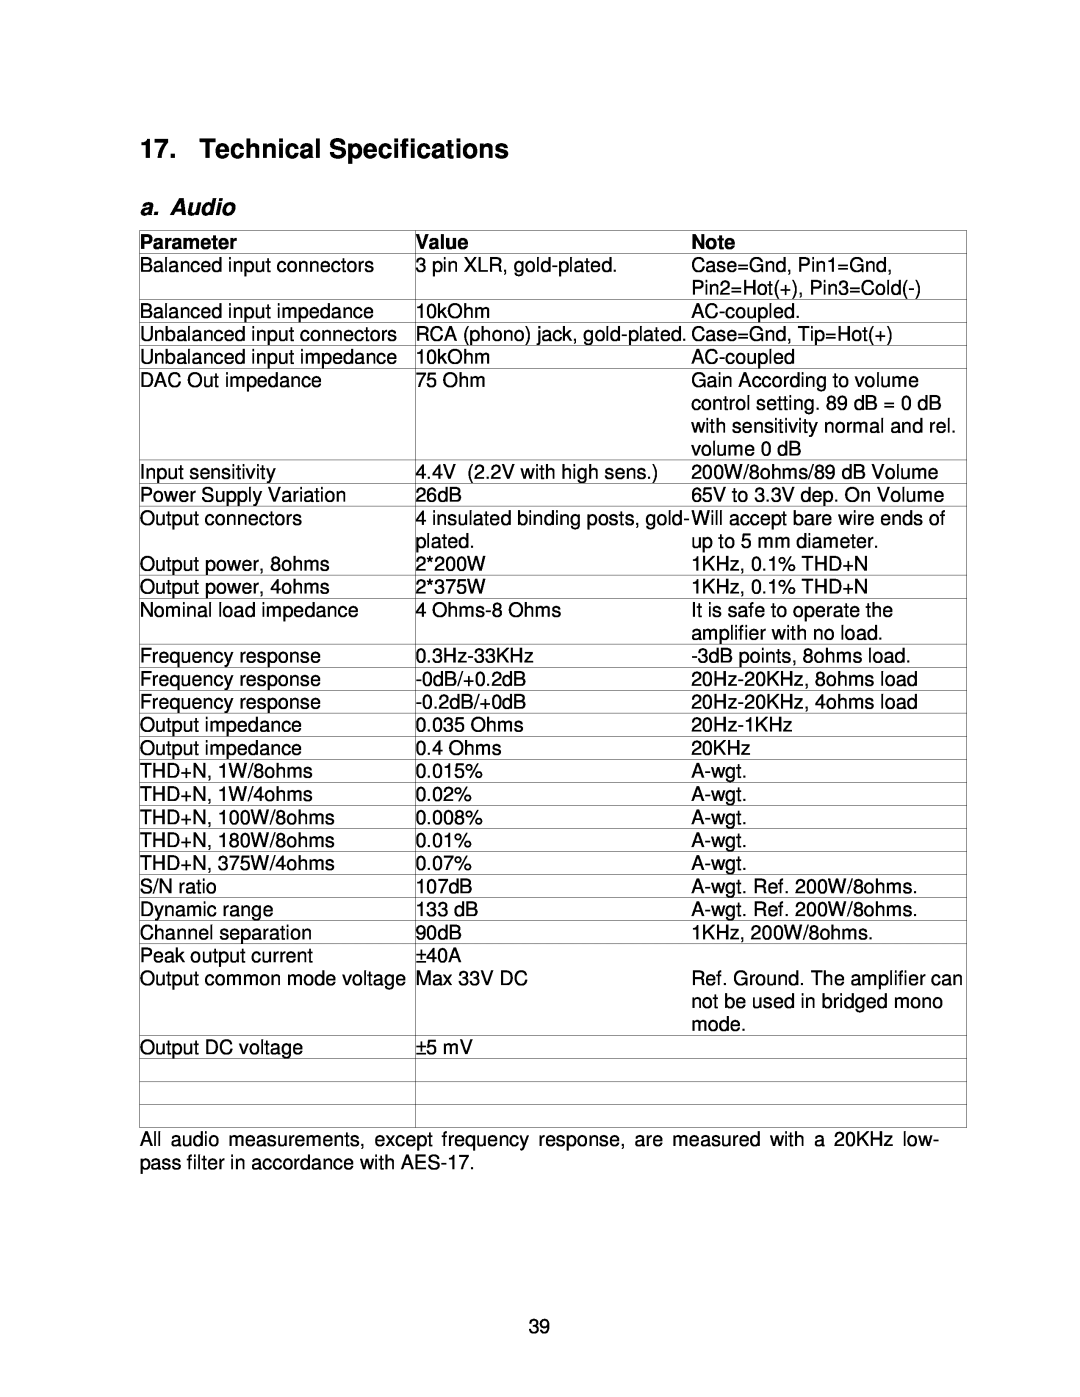 Lyngdorf Audio TDA 2200 owner manual Technical Specifications a. Audio, Parameter, Value 